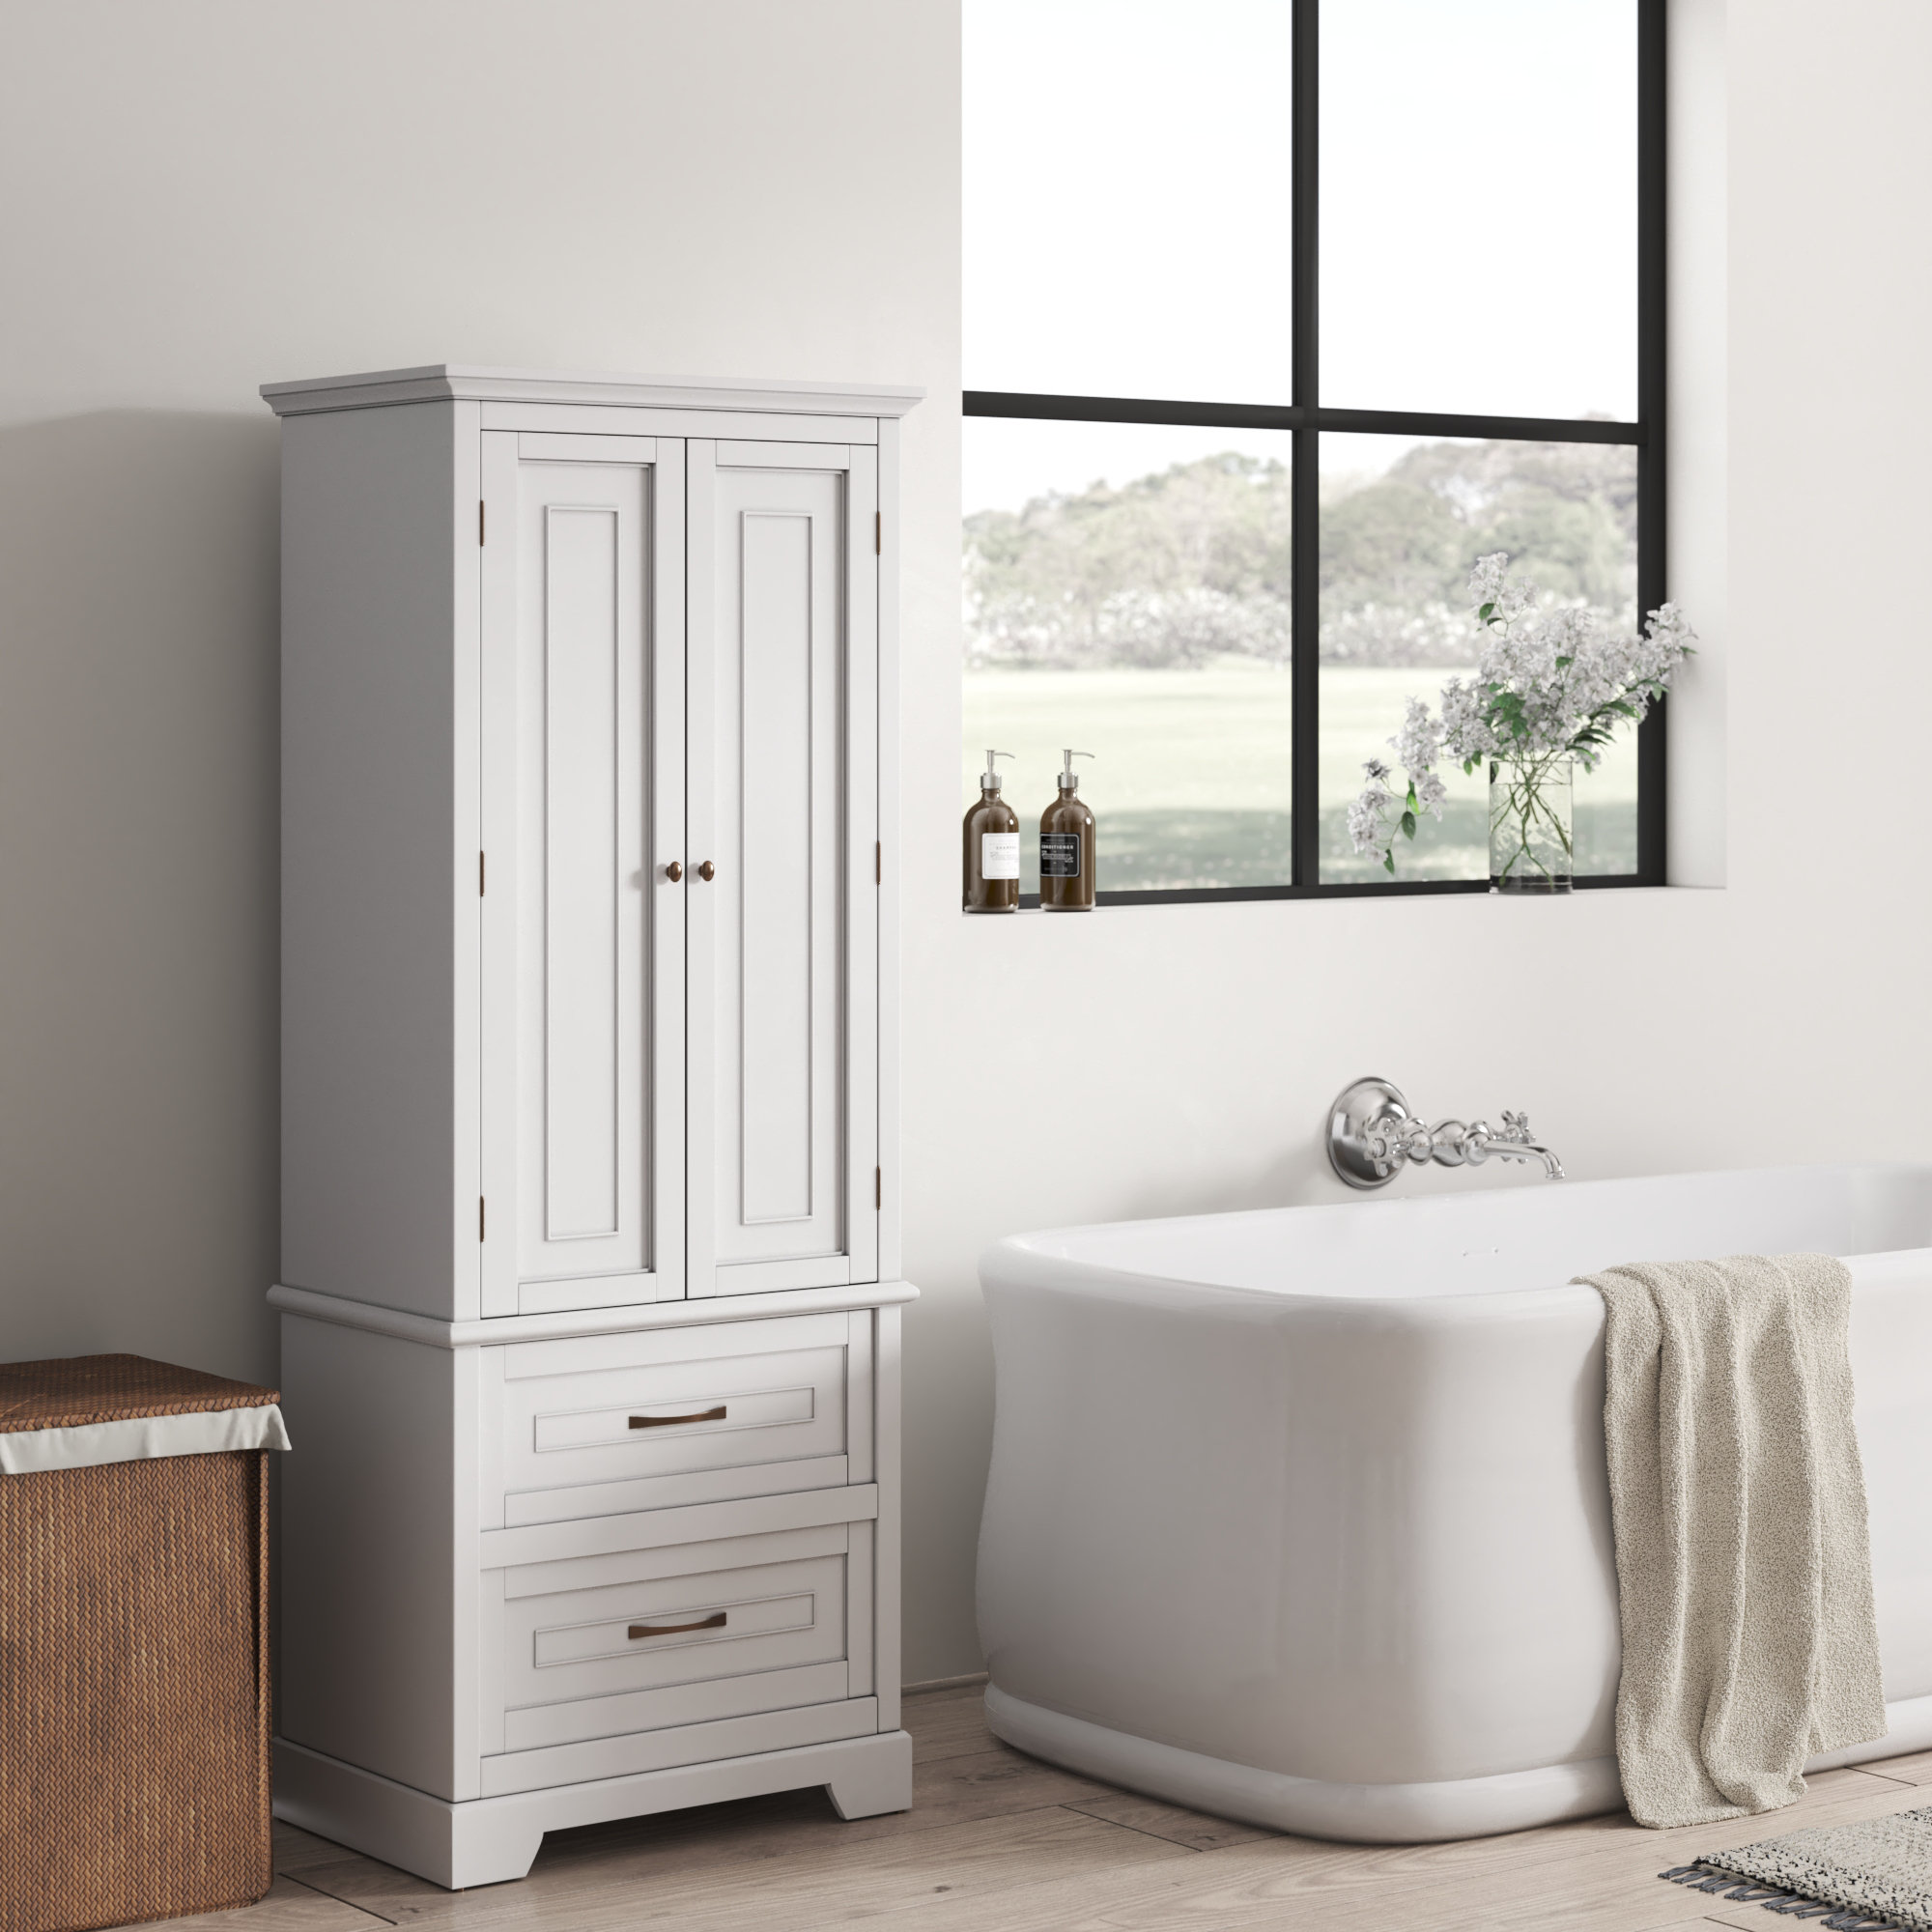 Tall Bathroom Linen Storage Cabinets | diocesesa.org.br